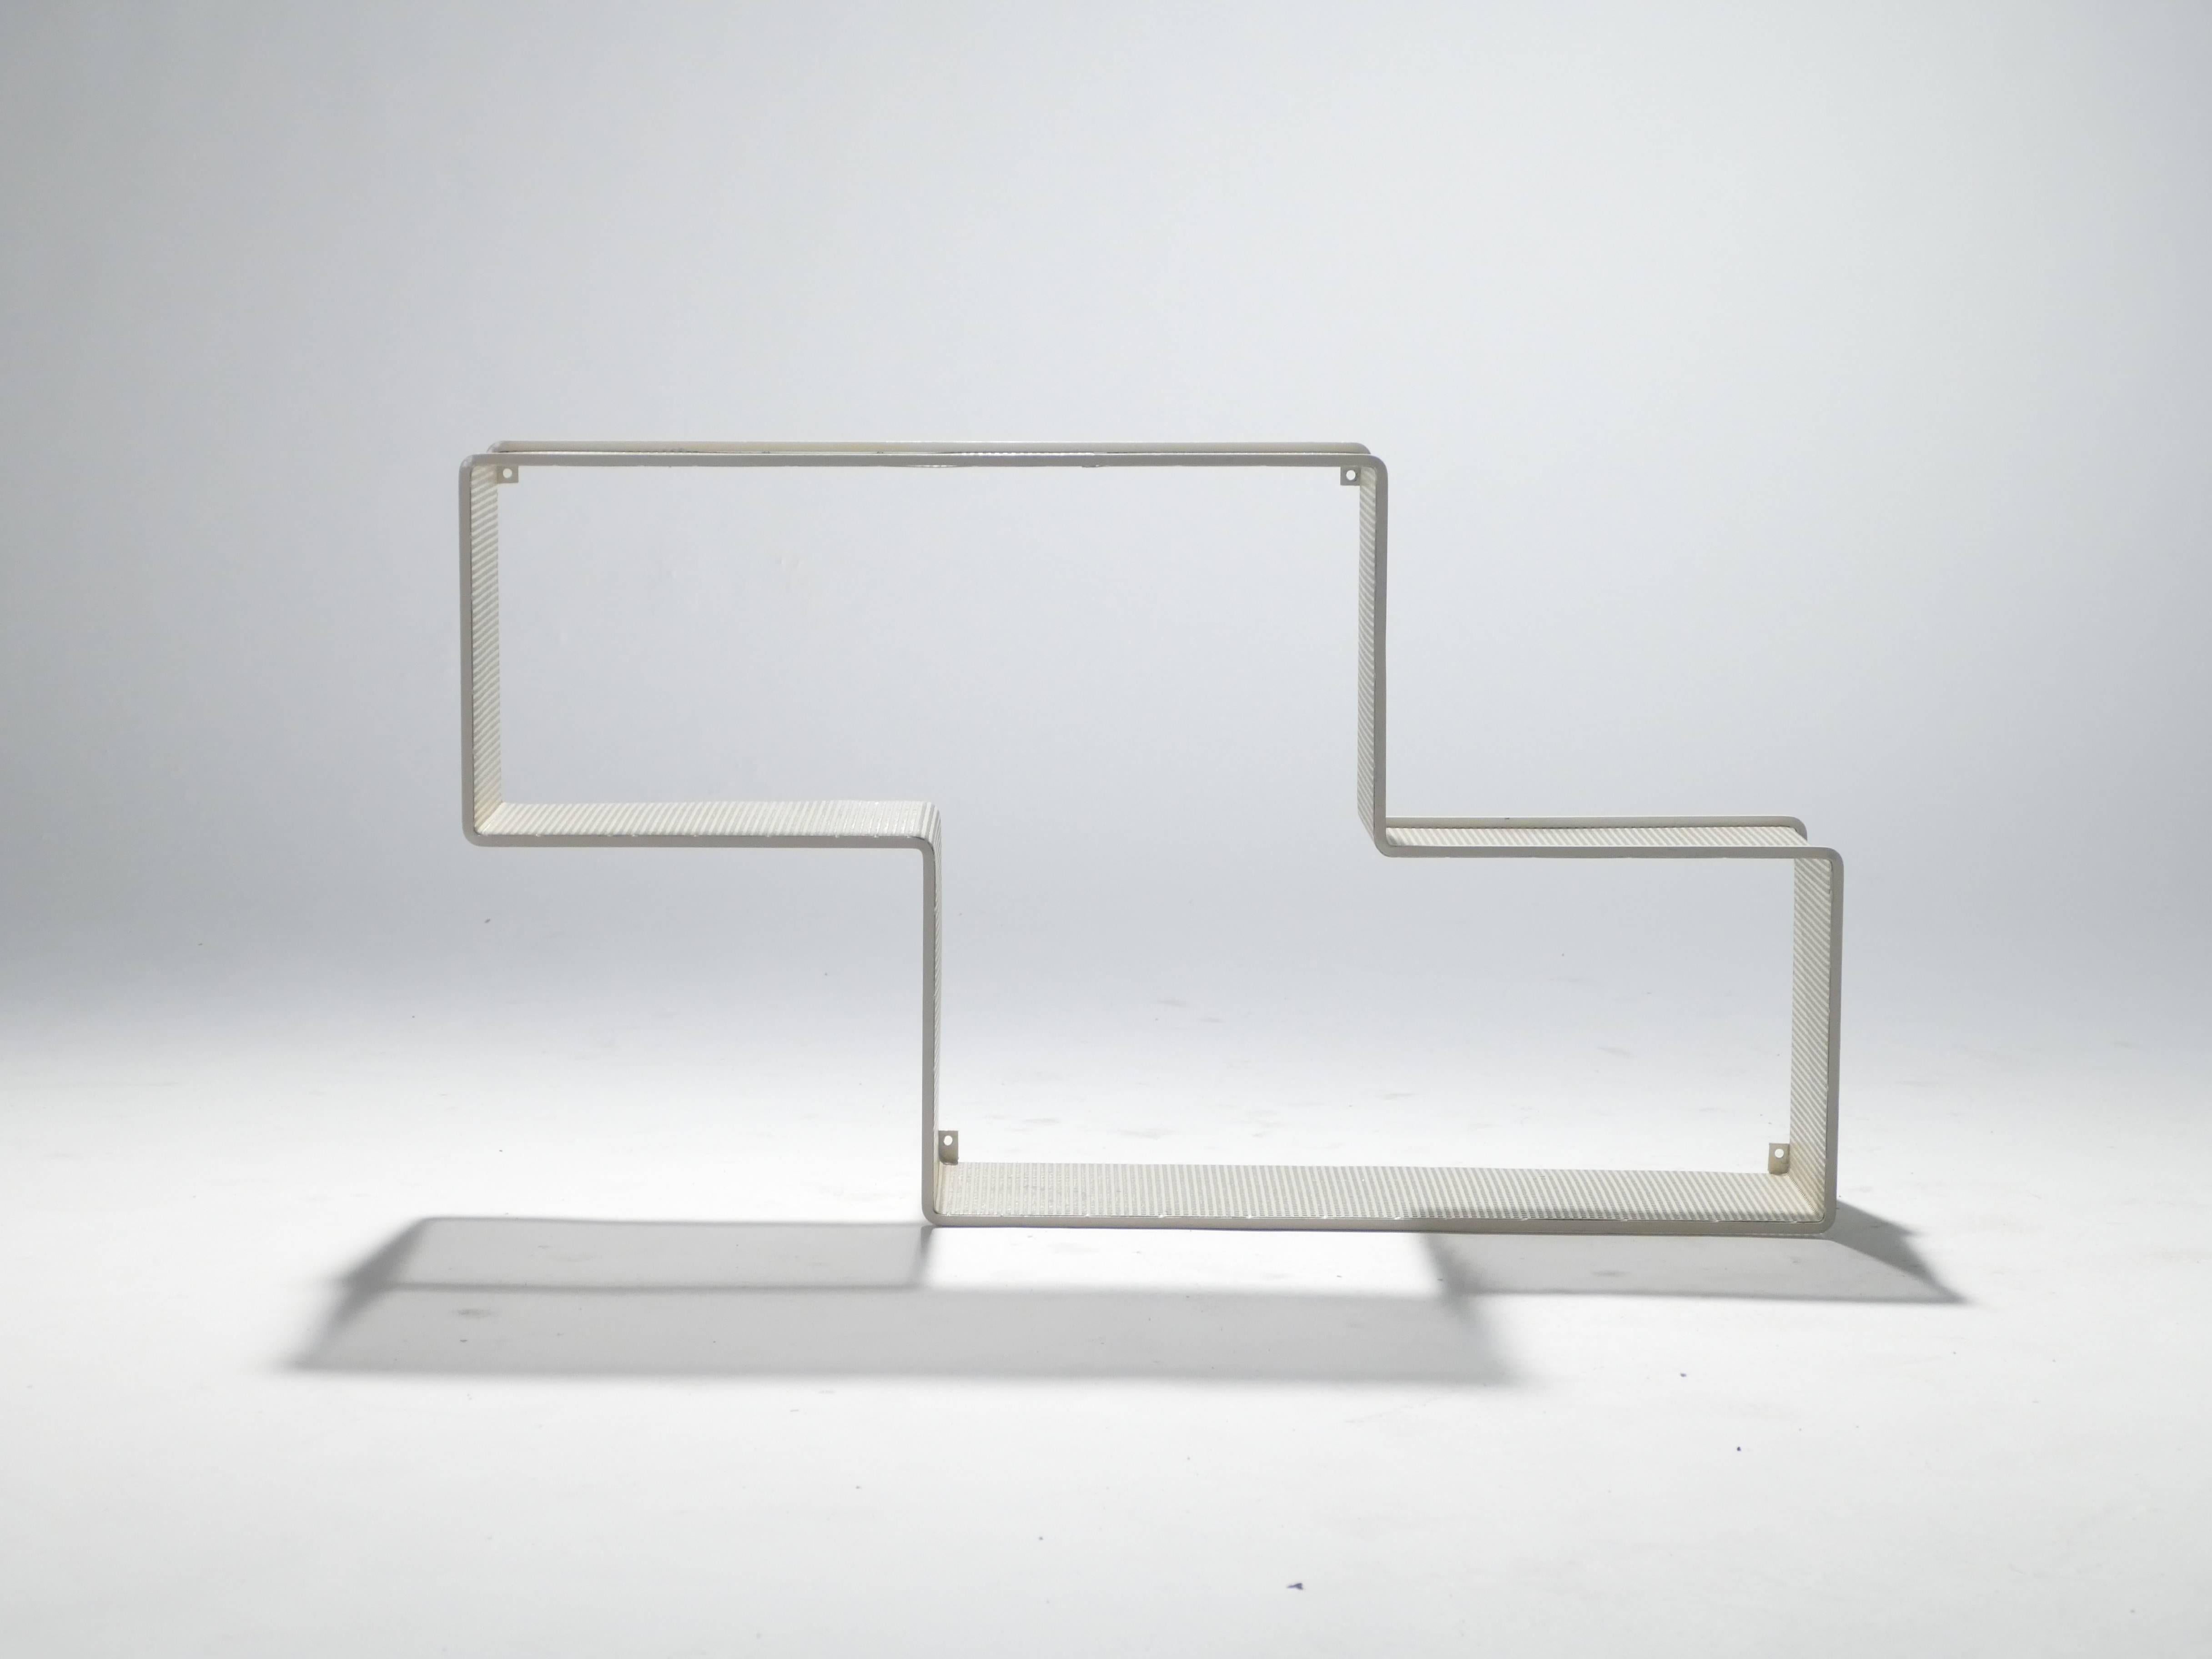 With its strong lines, minimal materials, and amusing design, this wall shelf is iconic of the Hungarian and French designer Mathieu Matégot. The designer strived to create objects of beauty and imagination that were also functional. This particular